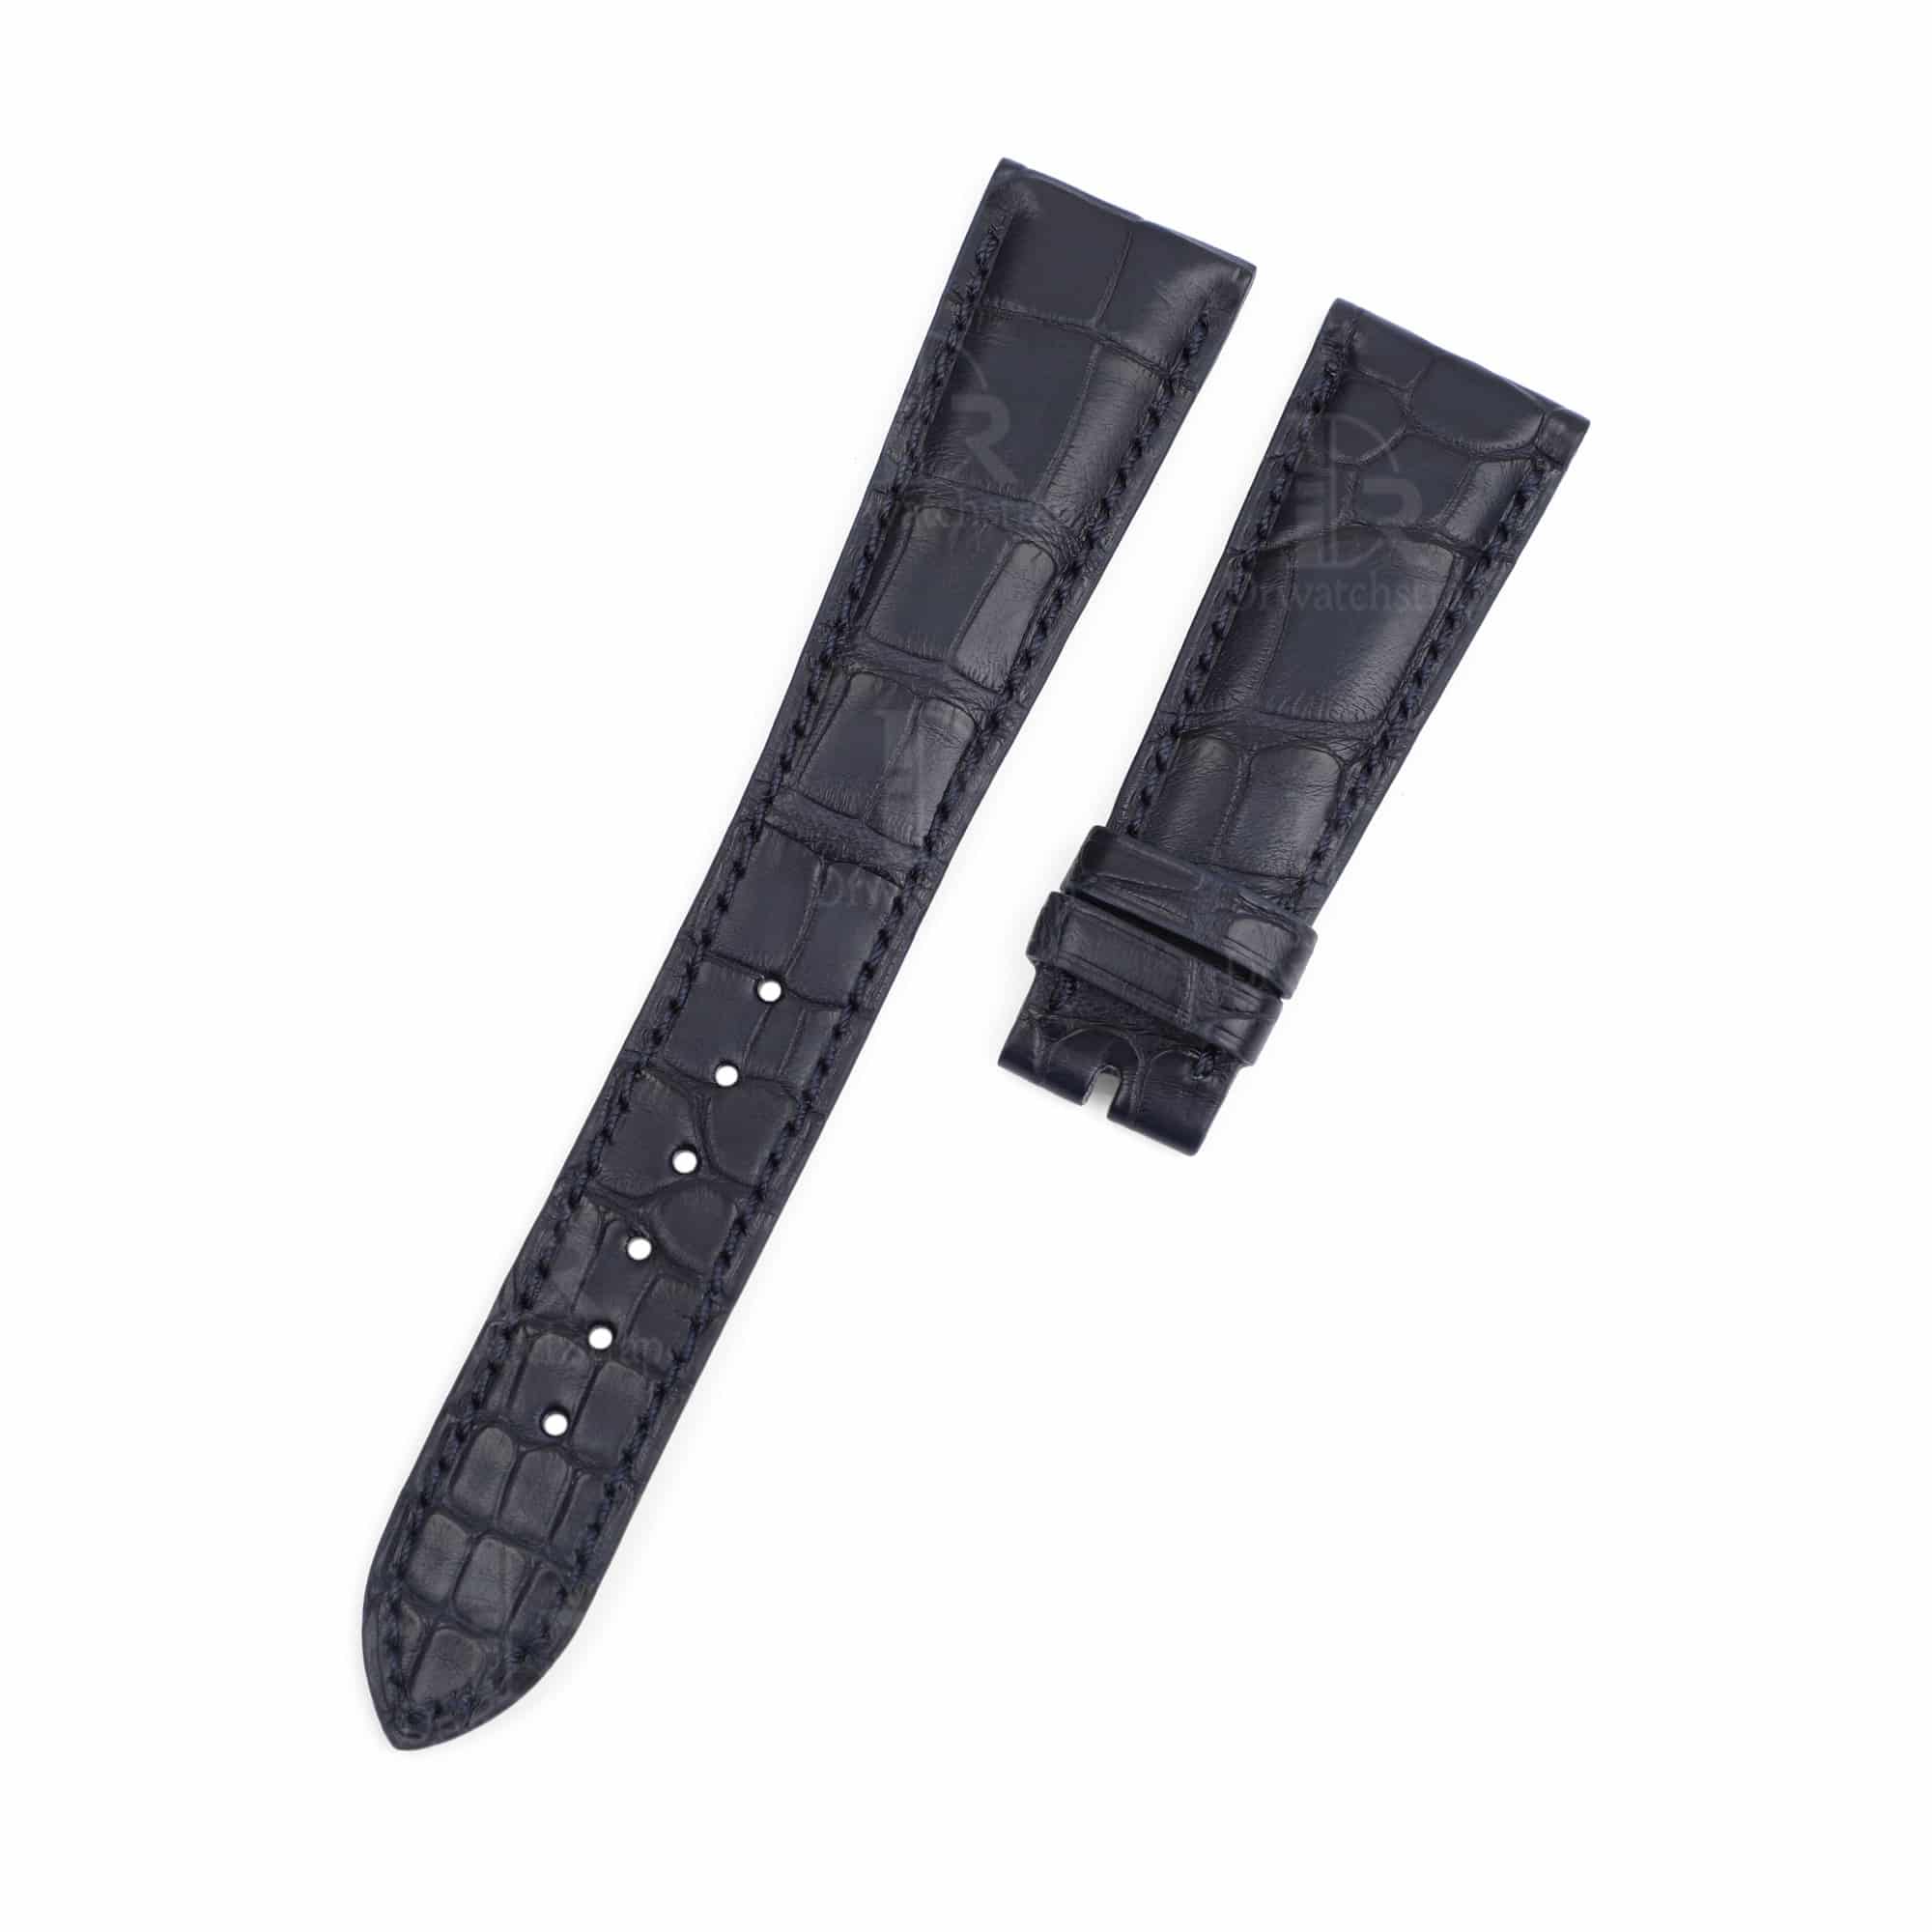 Custom handmade high-end quality Patek Philippe Blue leather watch band craftsmanship wholesale China factory supplier lug size available 12mm 14mm 16mm 18mm 19mm 20mm 21mm 22mm 23mm 24mm